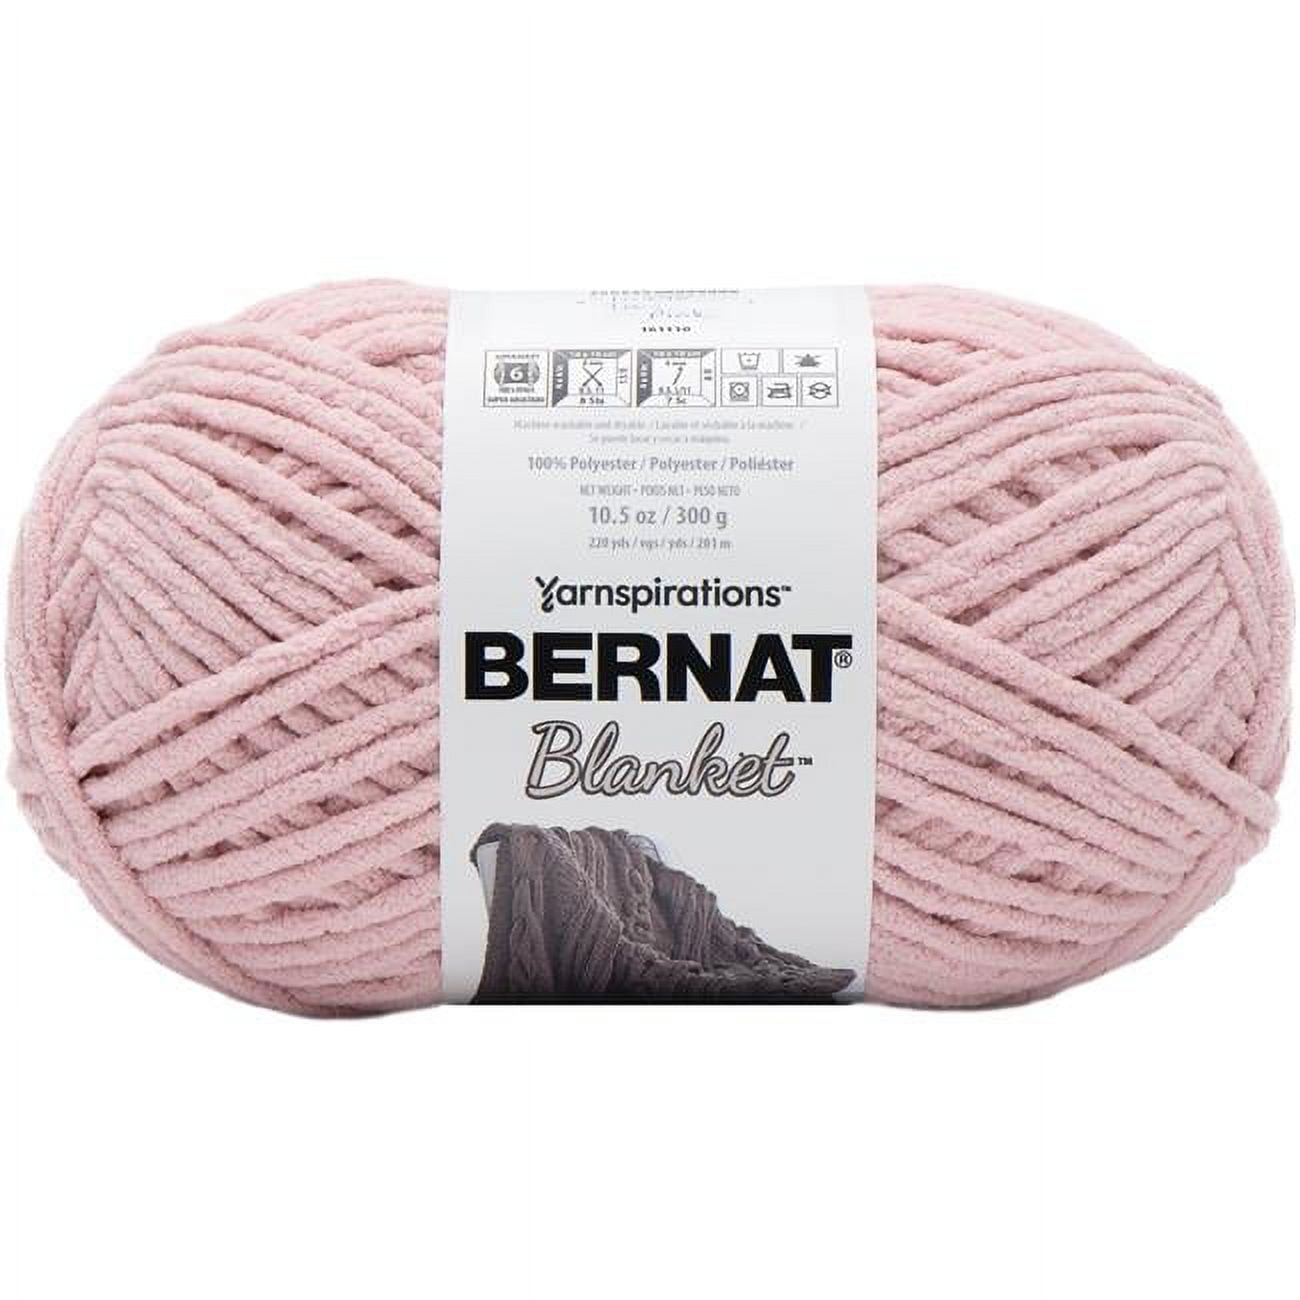  Bernat Blanket Yarn - Big Ball (10.5 oz) - 2 Pack with Pattern  Cards in Color (Terracotta Rose)